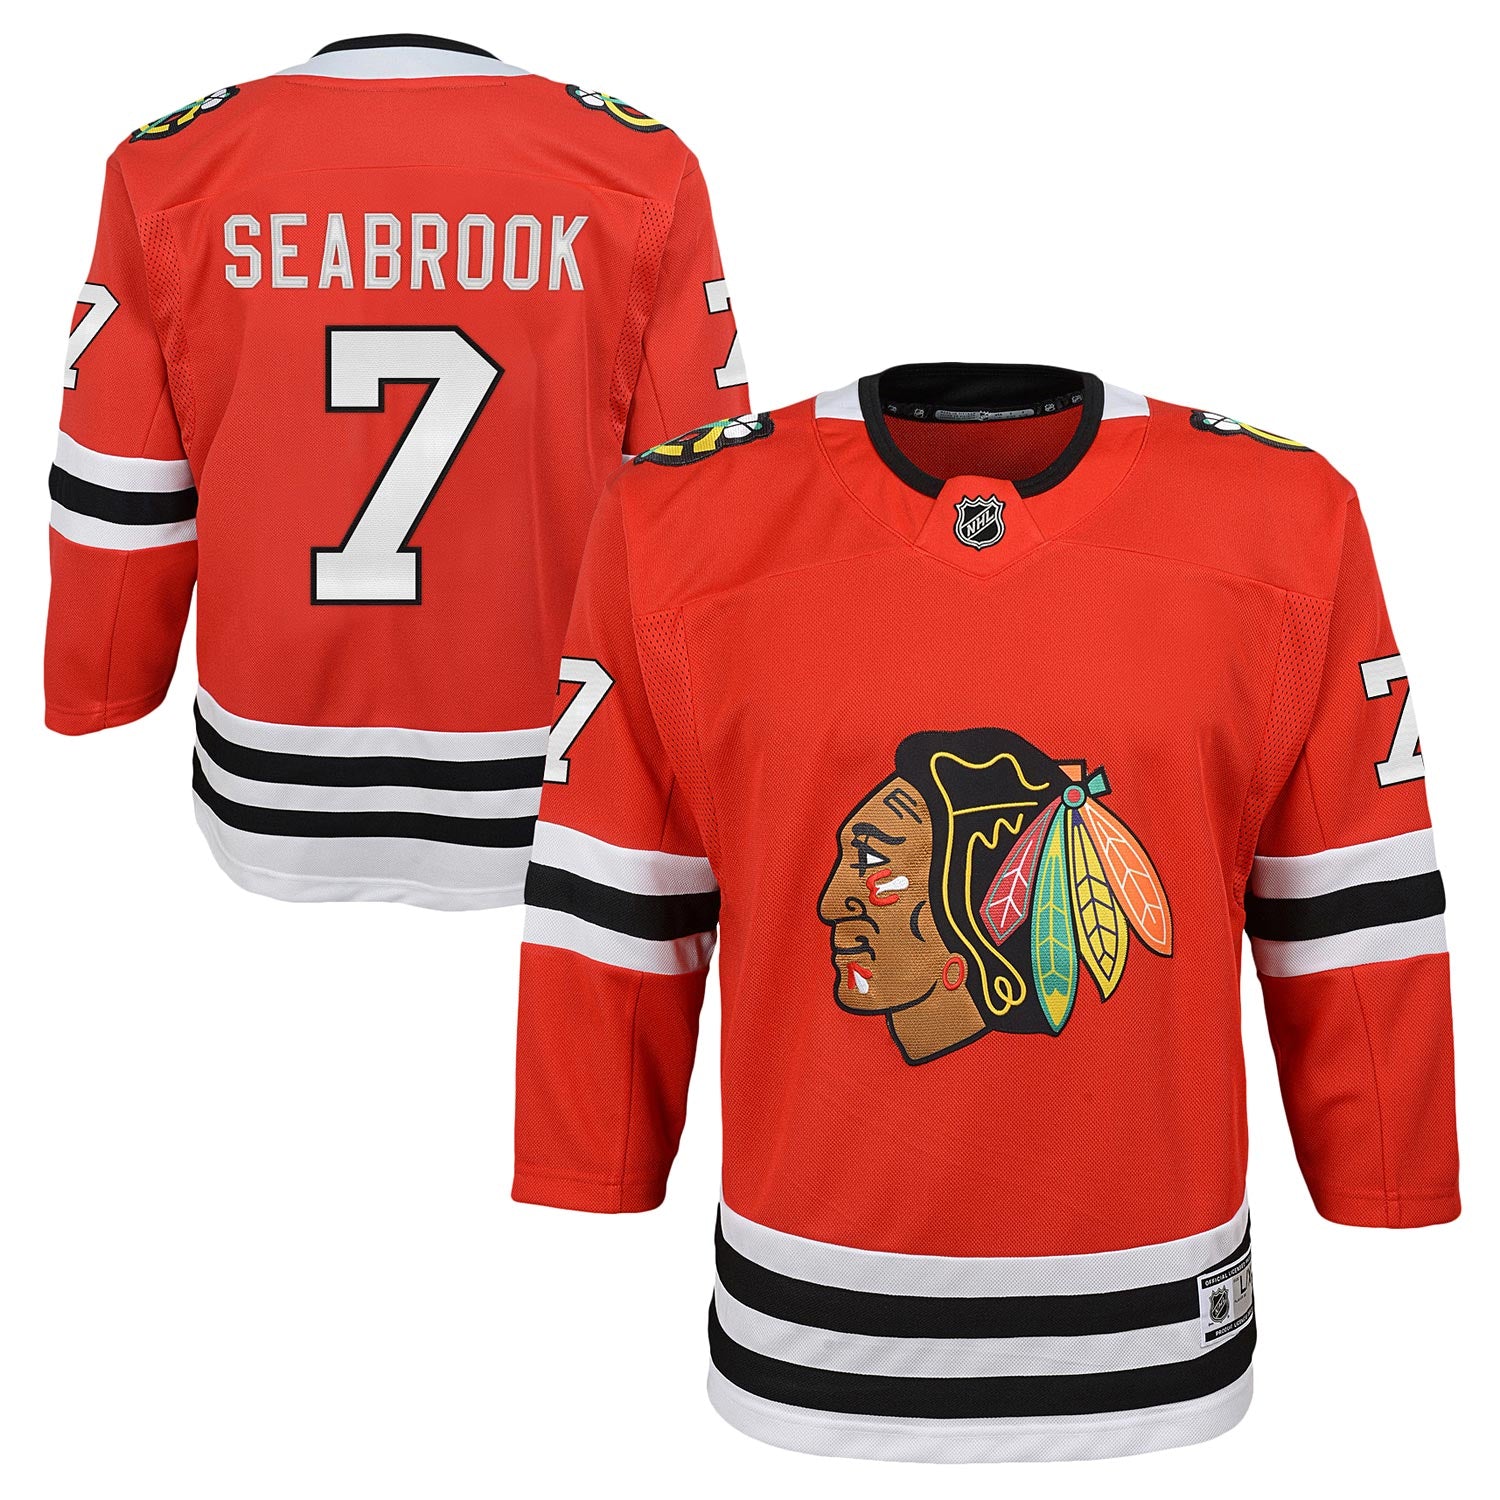 NHL Chicago BlackHawks Specialized Hockey Jersey In Classic Style